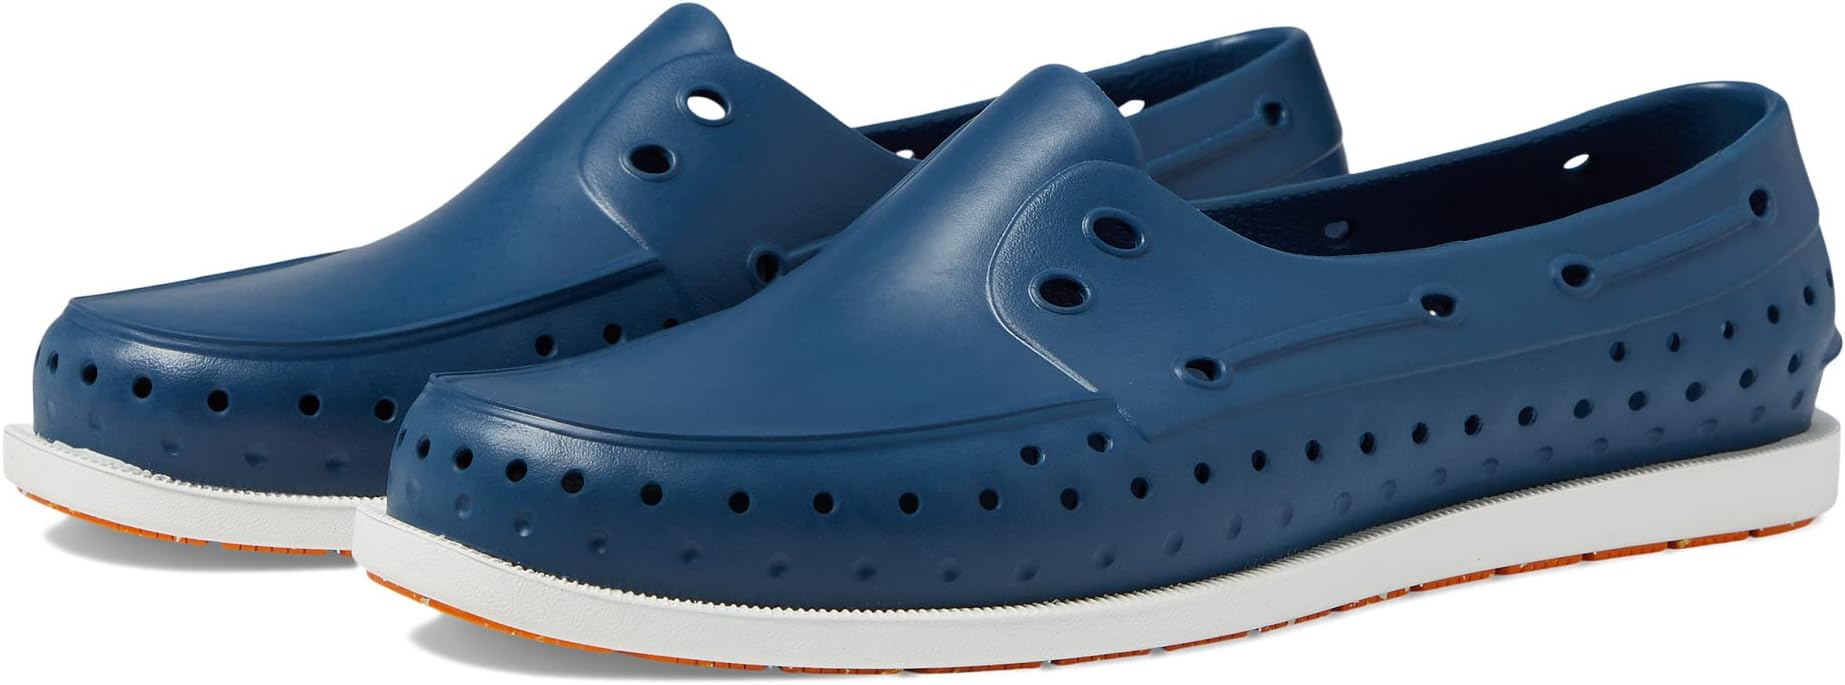 Лоферы Howard Sugarlite Native Shoes, цвет Frontier Blue/Shell White/Foxtail Speckle Rubber